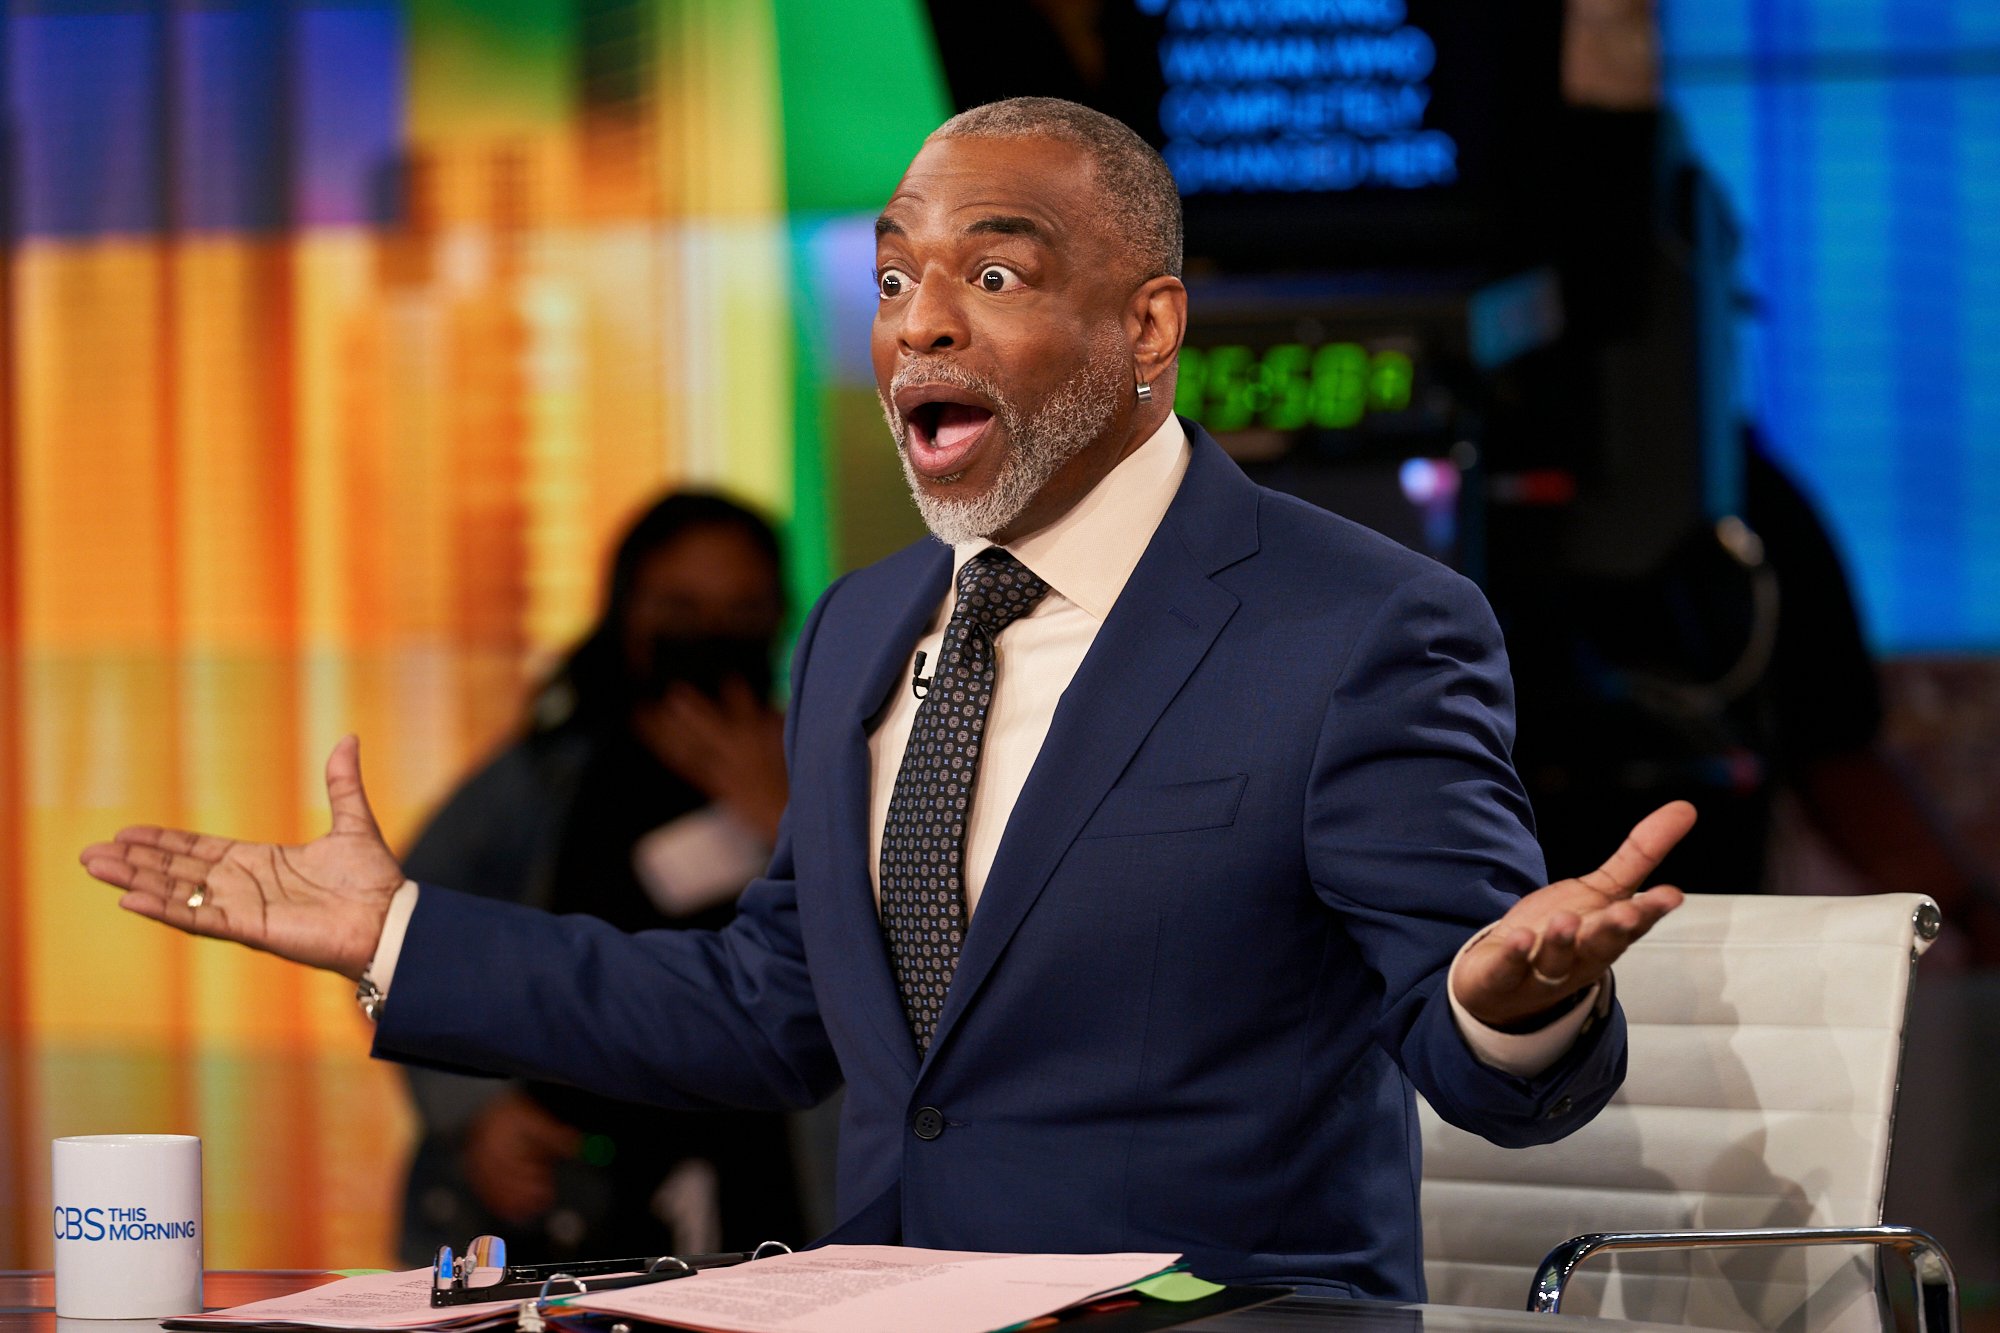 Actor LeVar Burton wears a suit and a mock surprise expression with his arms outstretched as he guest-hosts 'CBS This Morning' in May, 2021